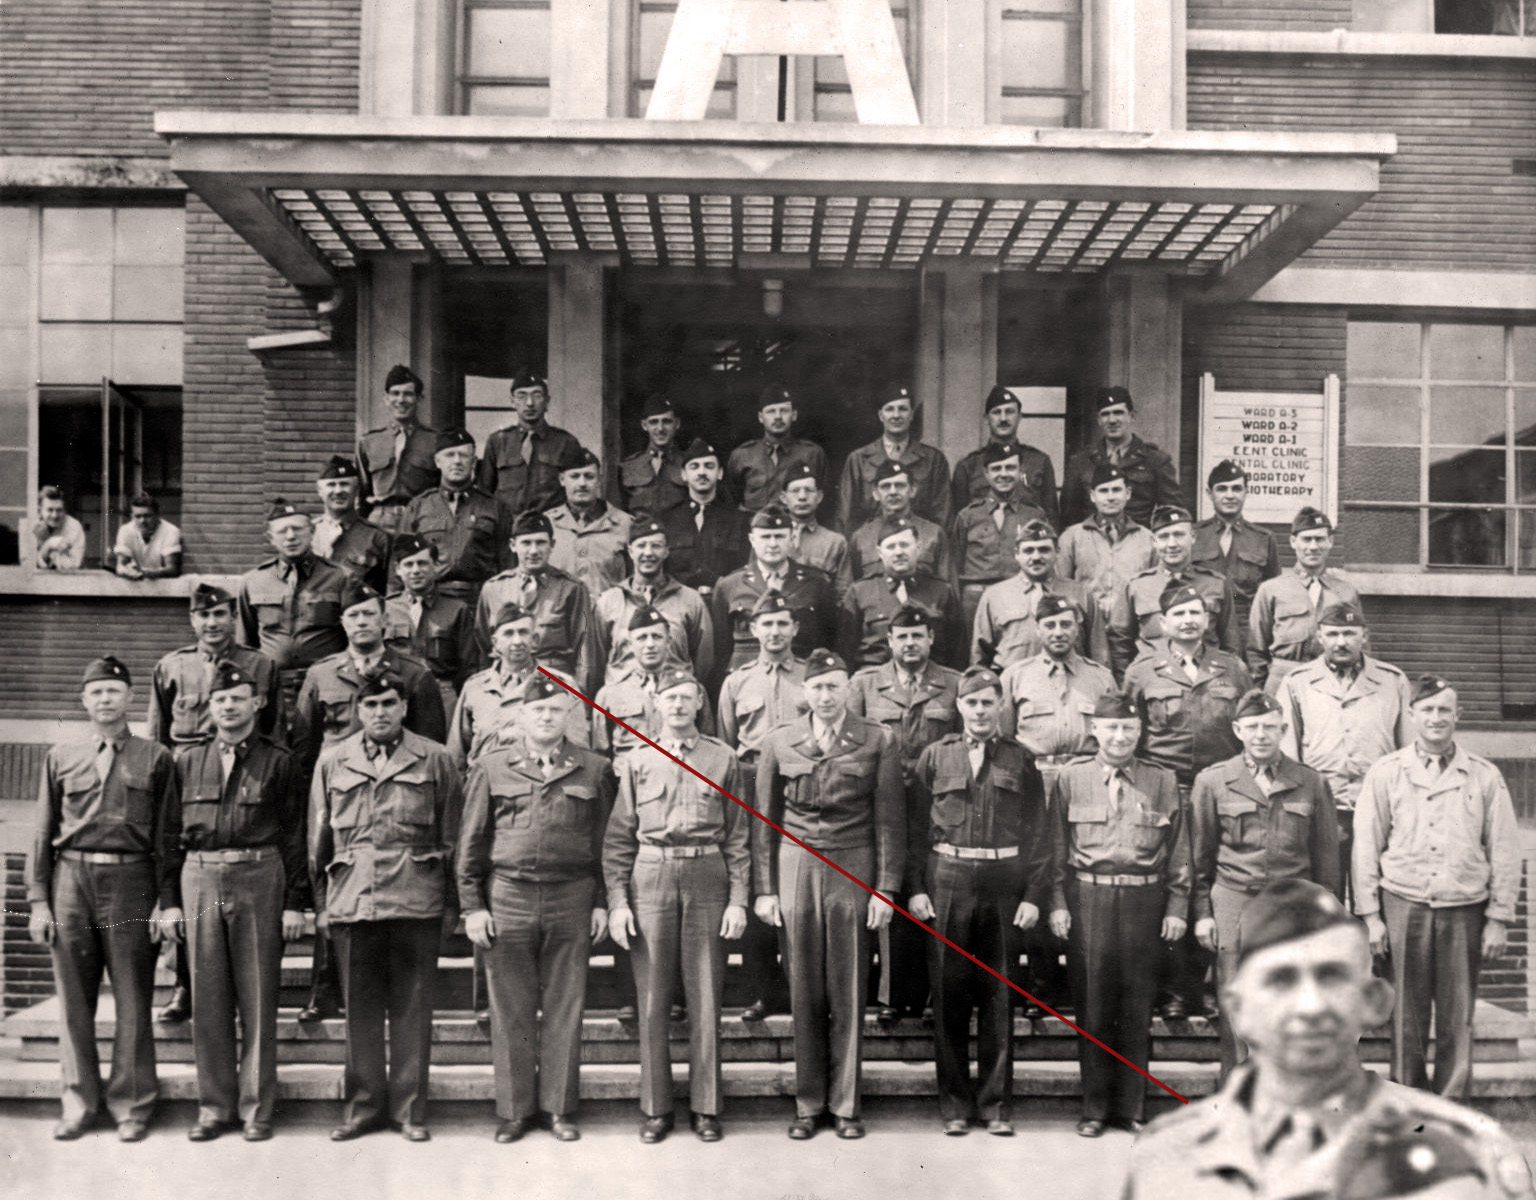 "Officer personnel of the hospital poses for a picture in front of Ward A." Tongres, Belgium, ca. 1945 Inset-right: Dr. Murray Rich